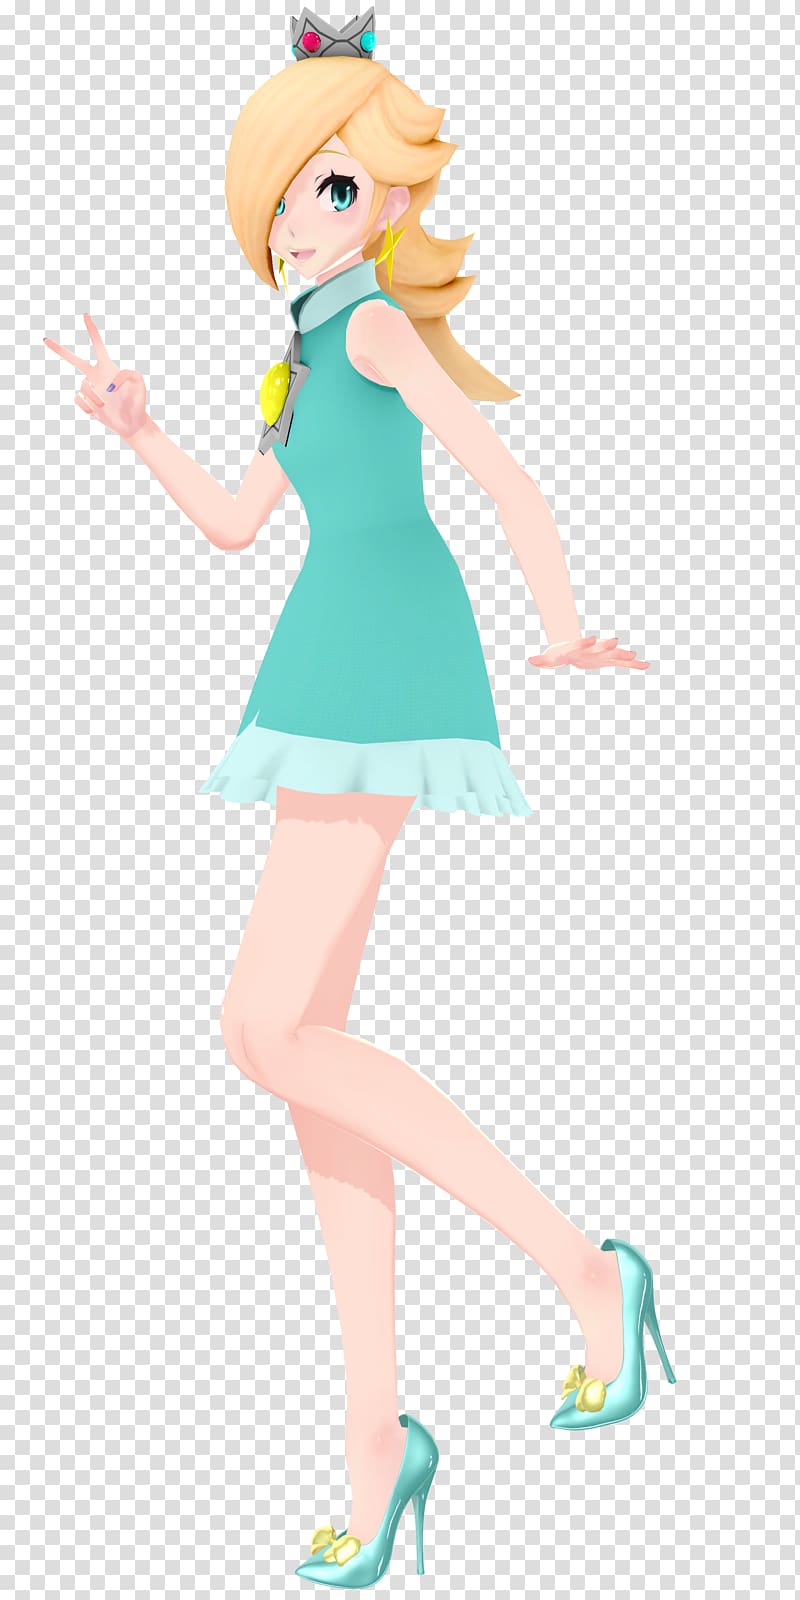 Rosalina Mario & Sonic at the Olympic Games Mario Tennis Aces Princess Peach, tennis transparent background PNG clipart